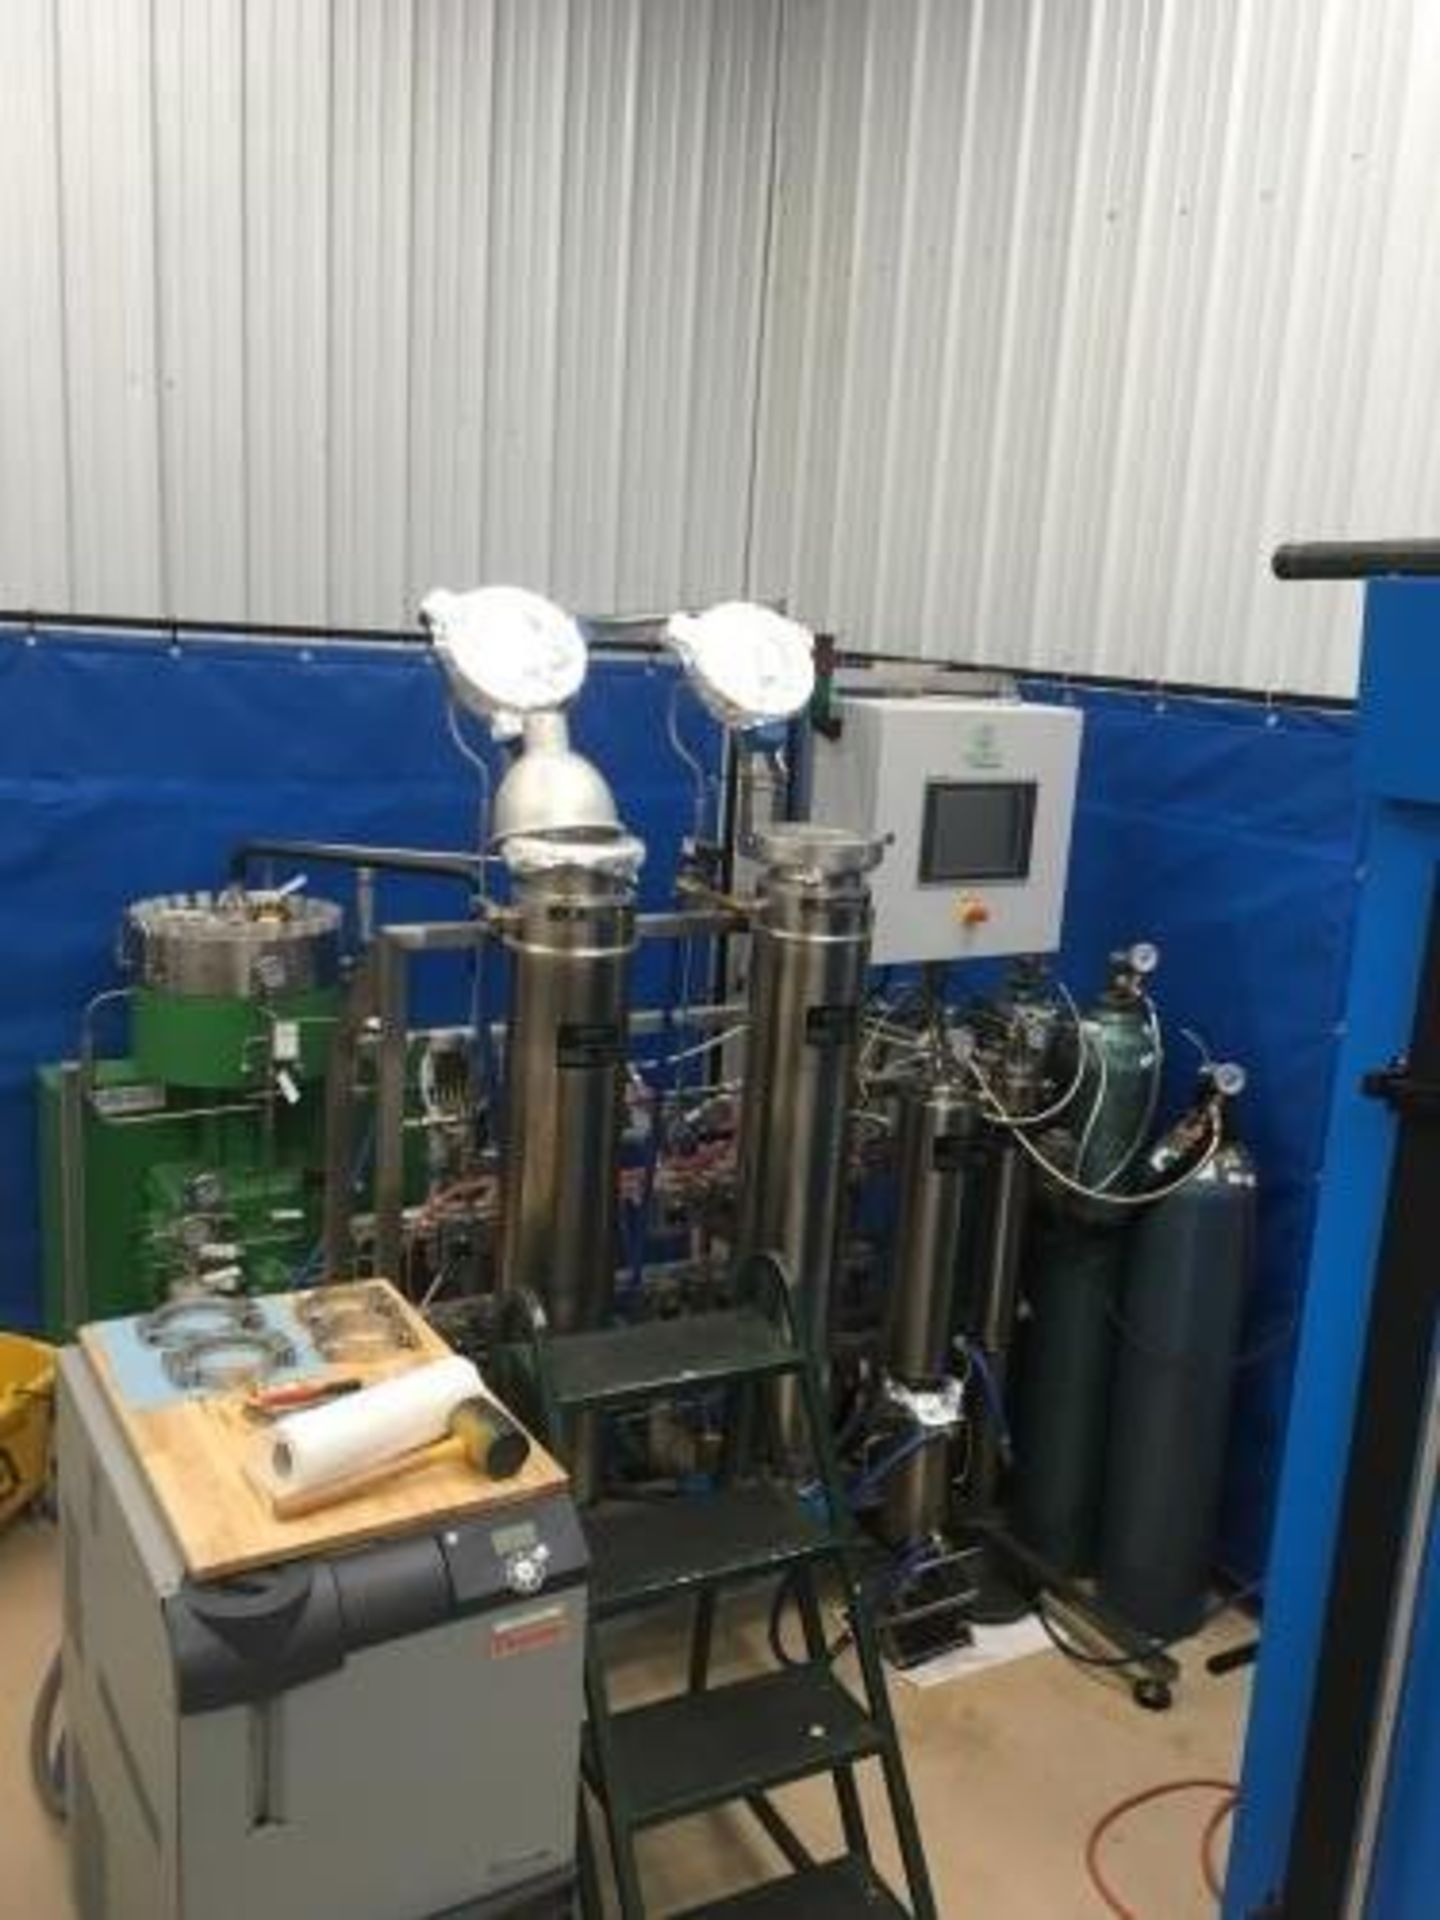 Used-Apeks "Transformer" Subcritical & Supercritical CO2 Extraction System, Model 2000 20L X 20LD - Image 4 of 14